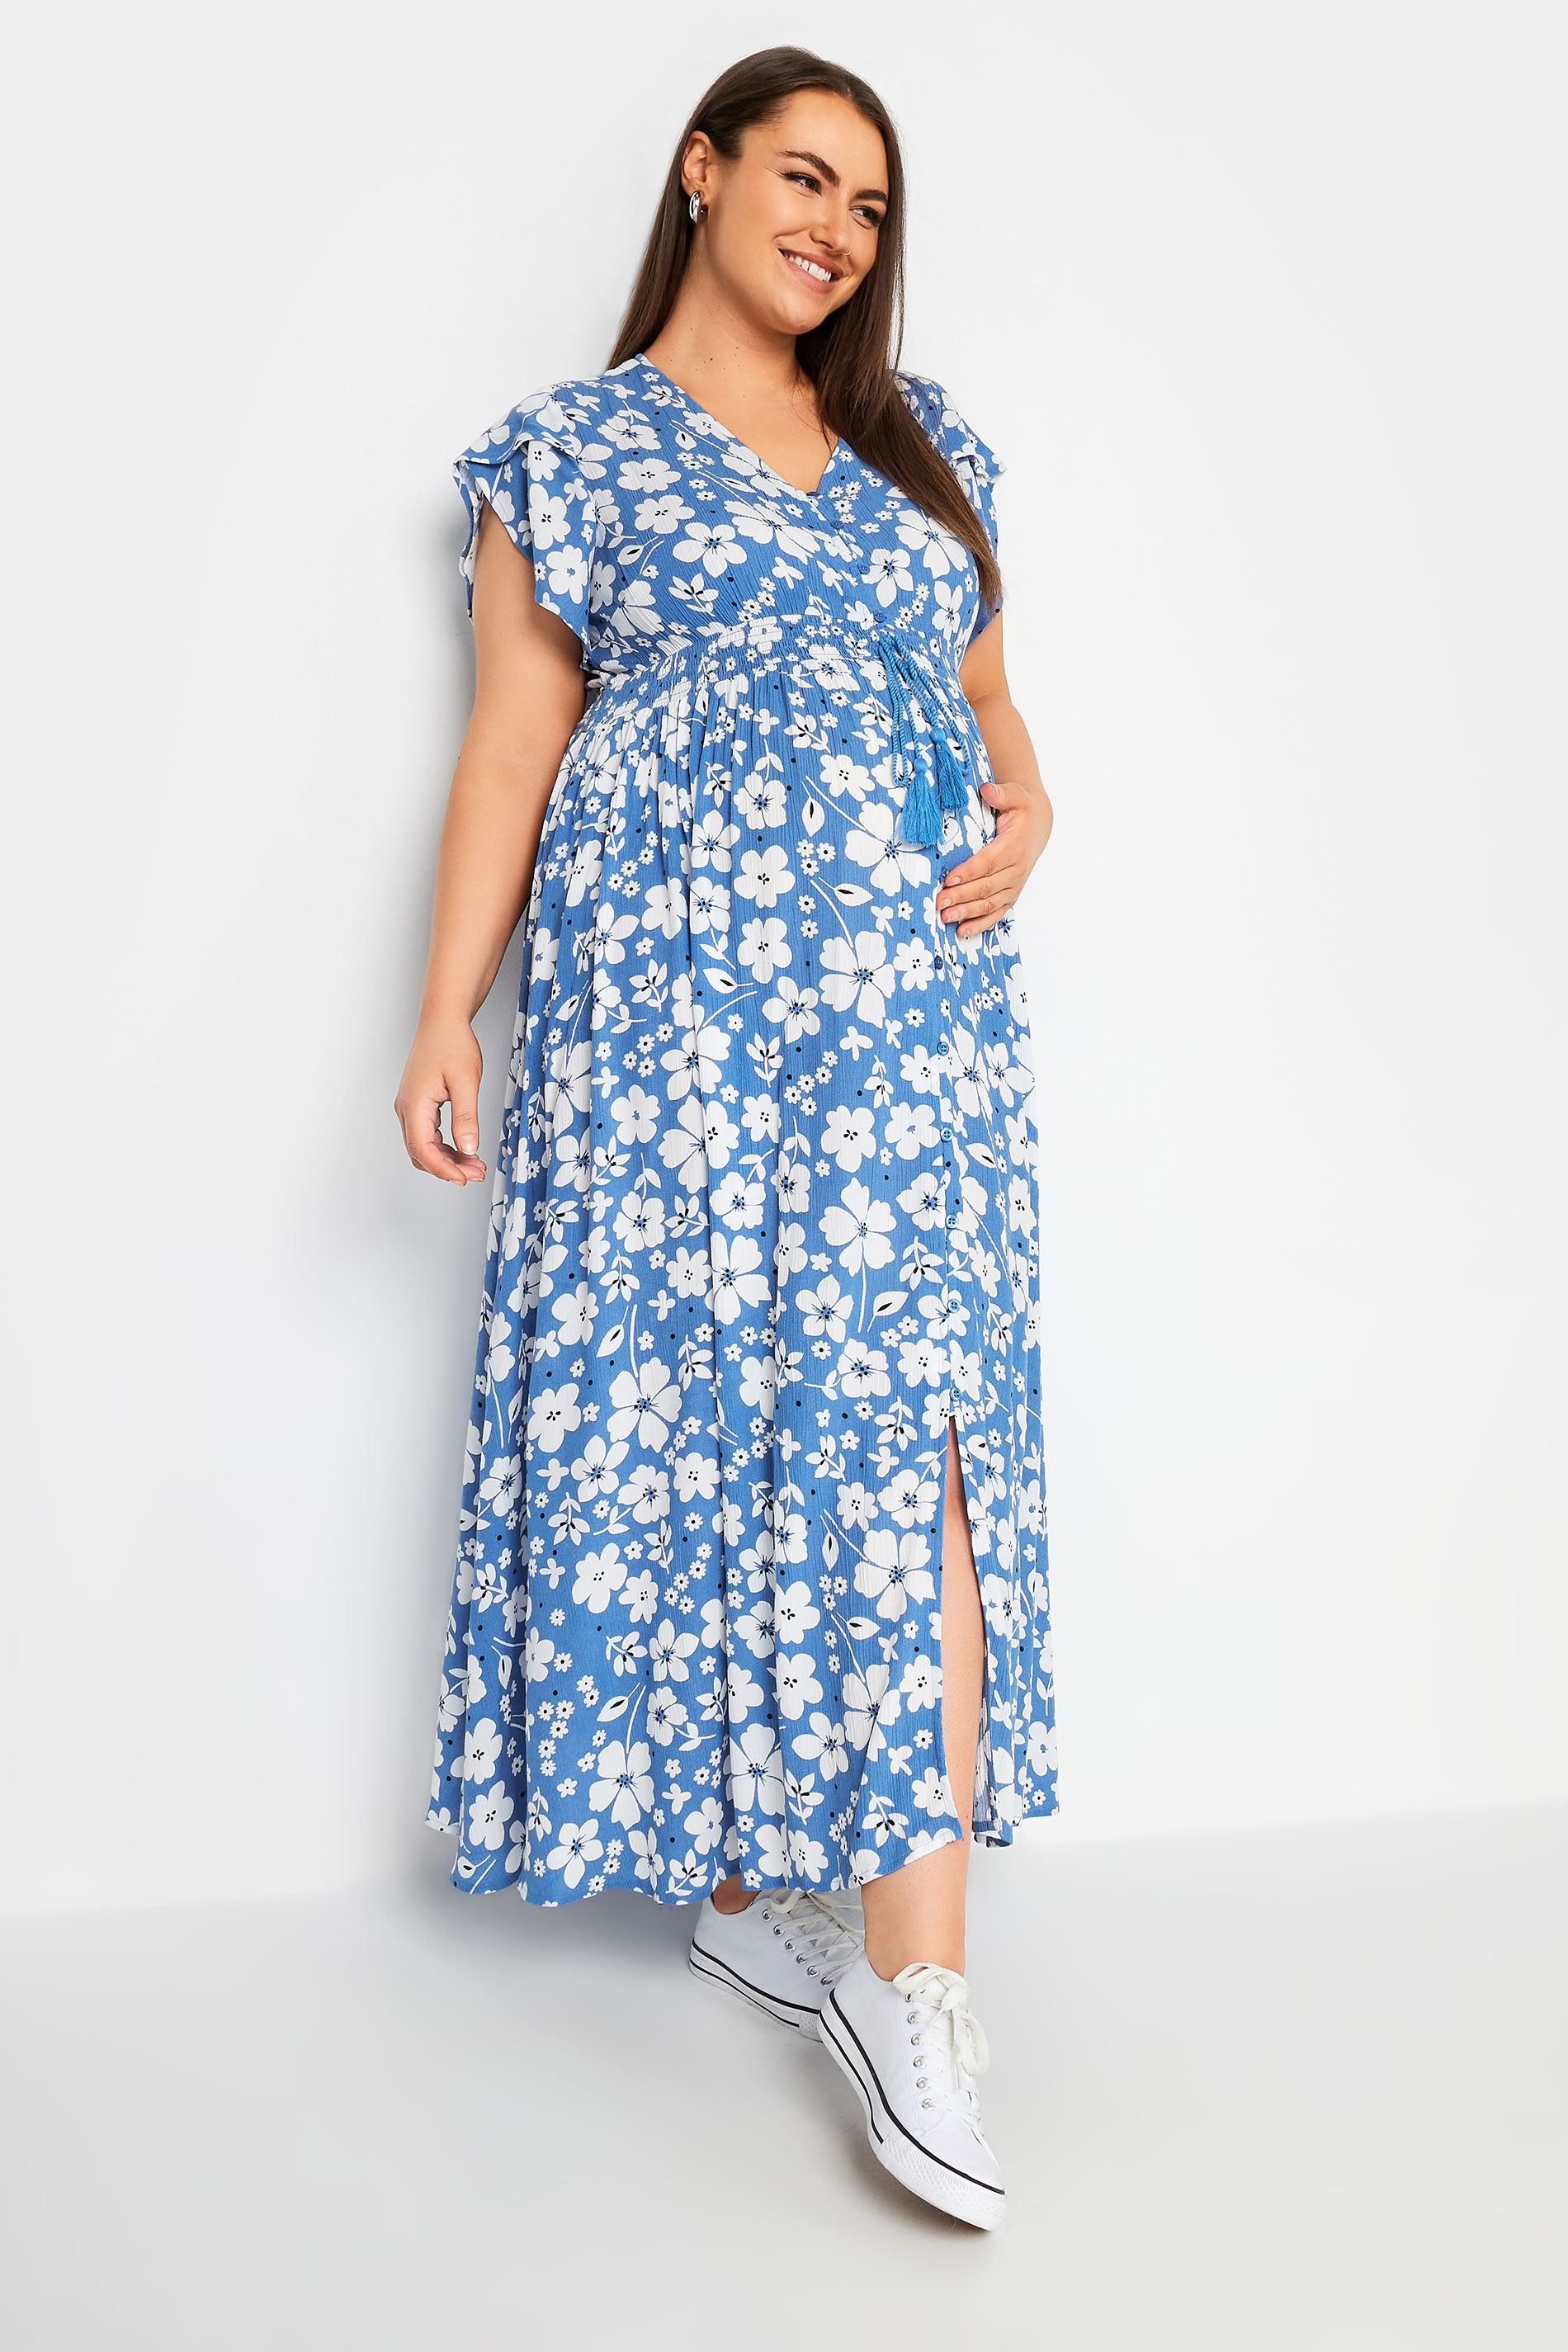 BUMP IT UP MATERNITY Plus Size Blue Floral Print Maxi Dress | Yours Clothing 2